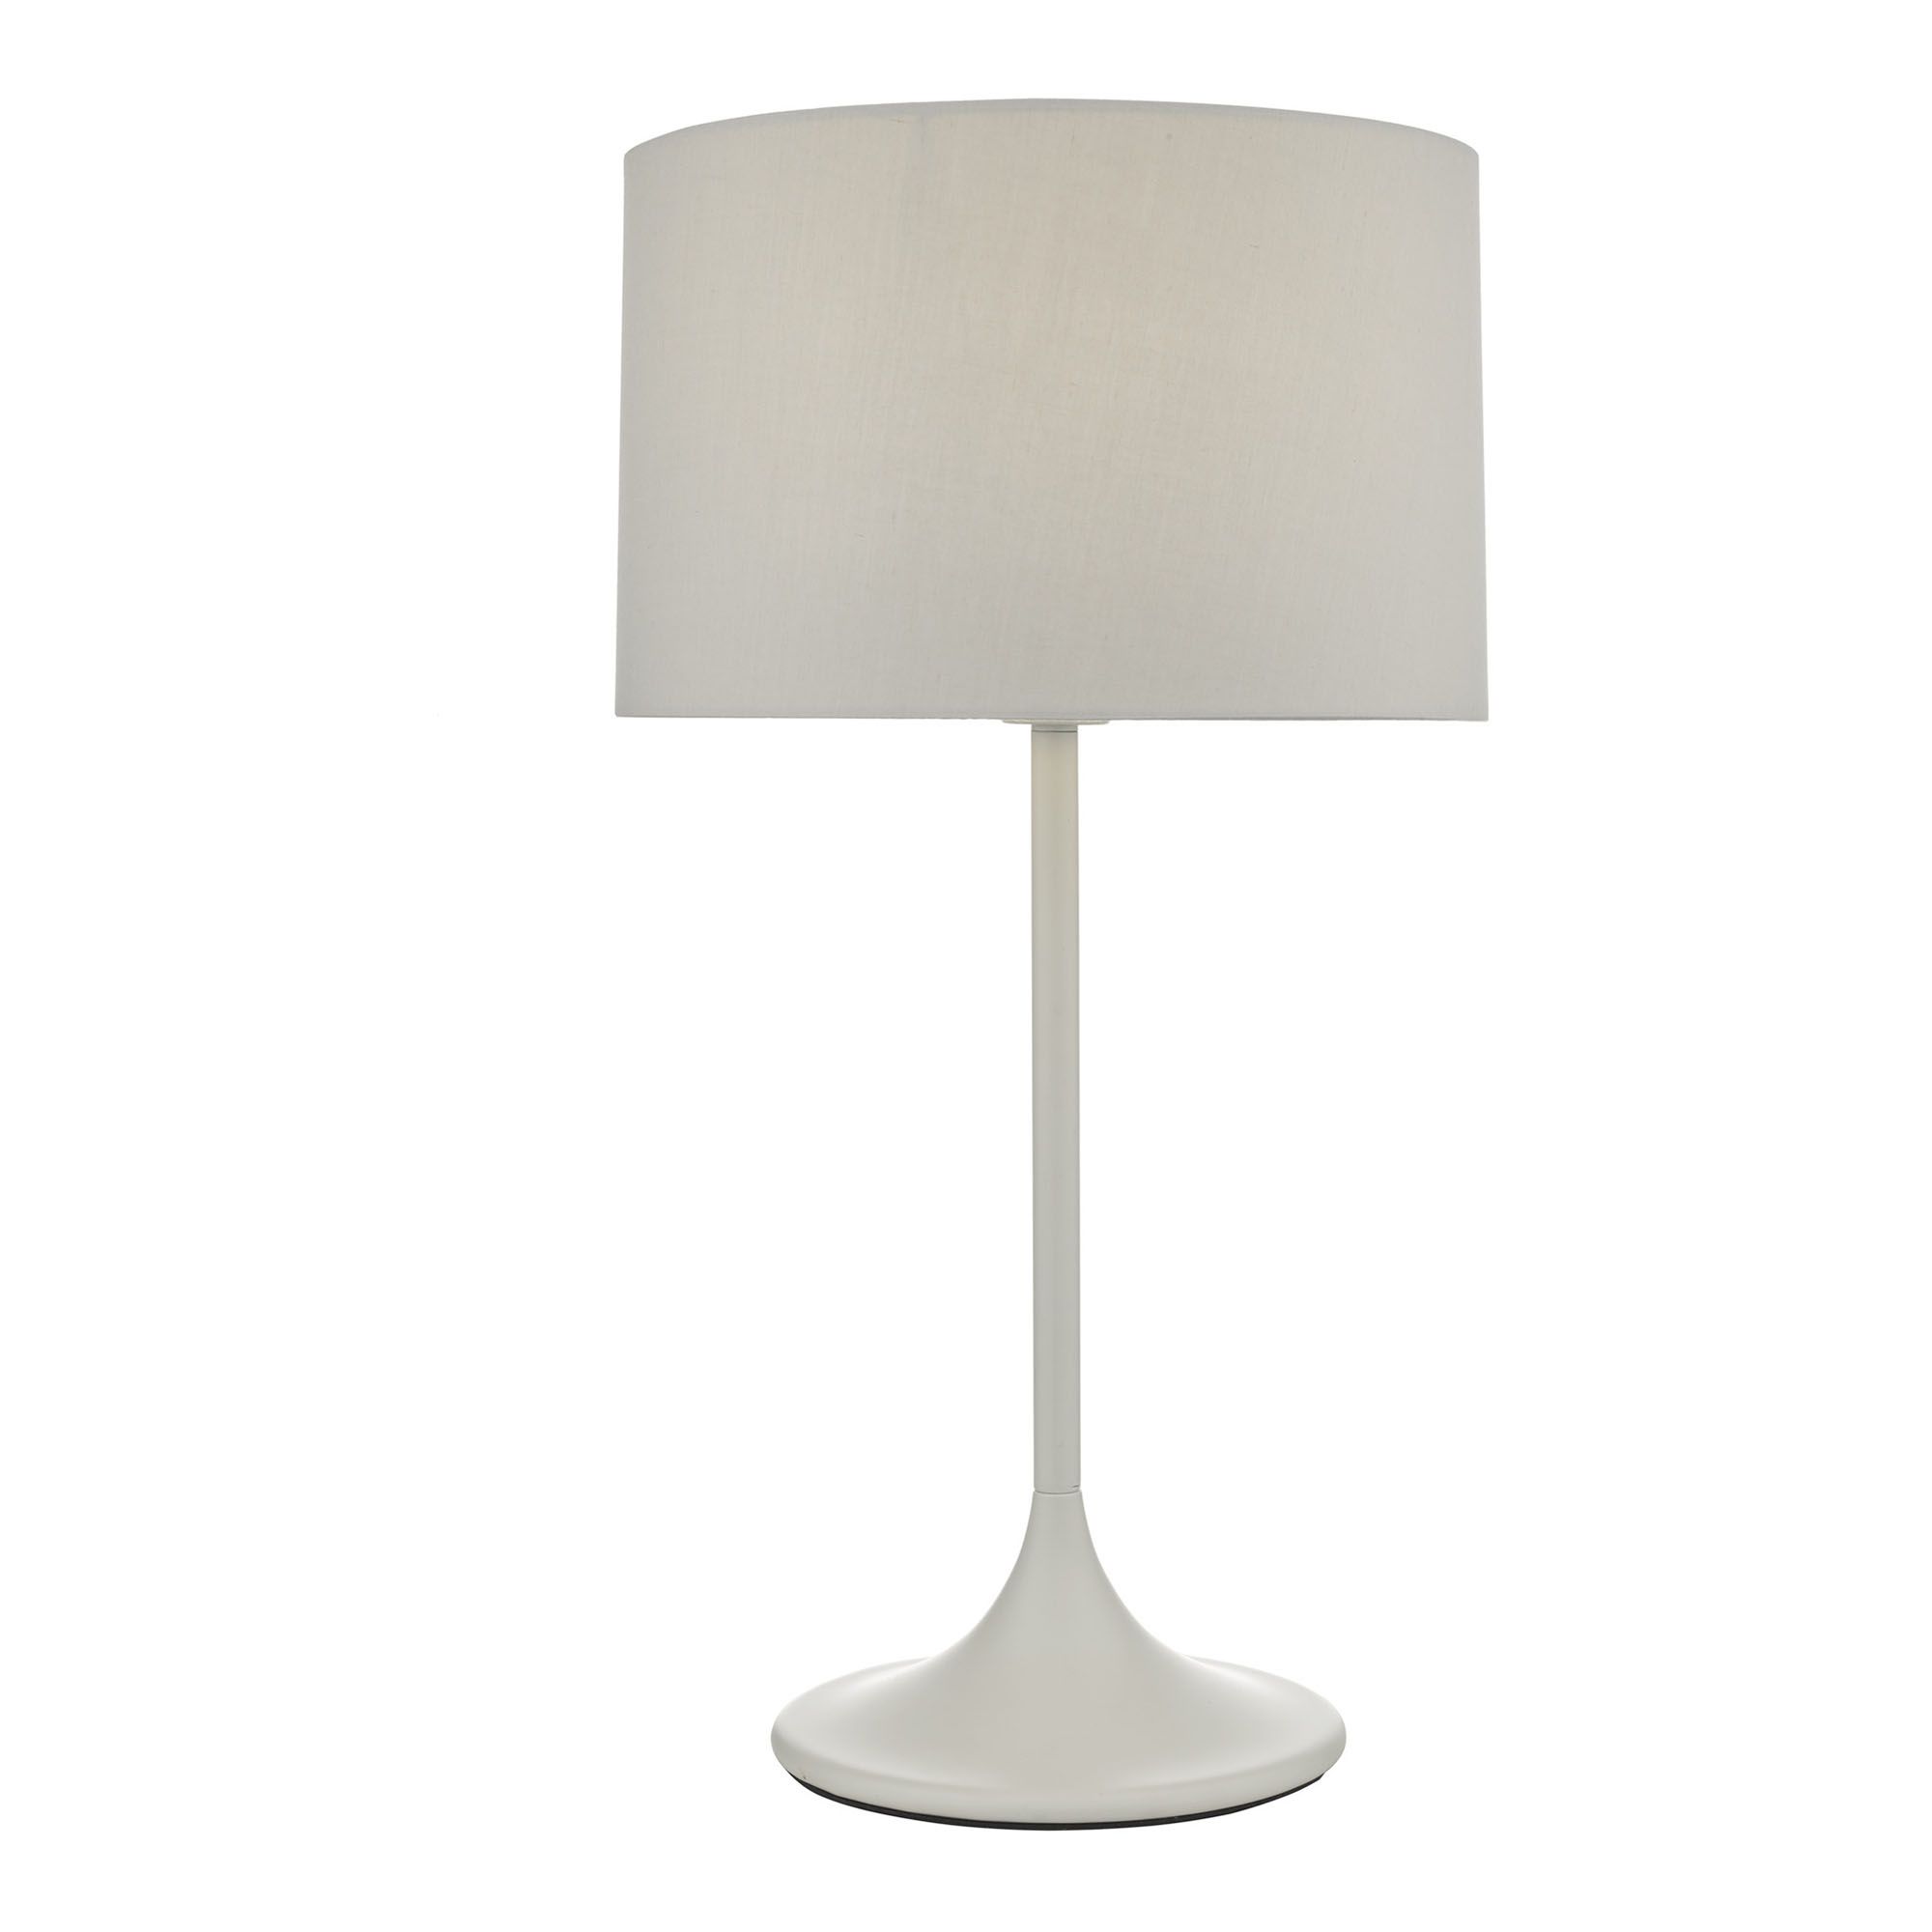 Funchal Table Lamp Grey With Shade, Tall Table Lamp With Grey Shade